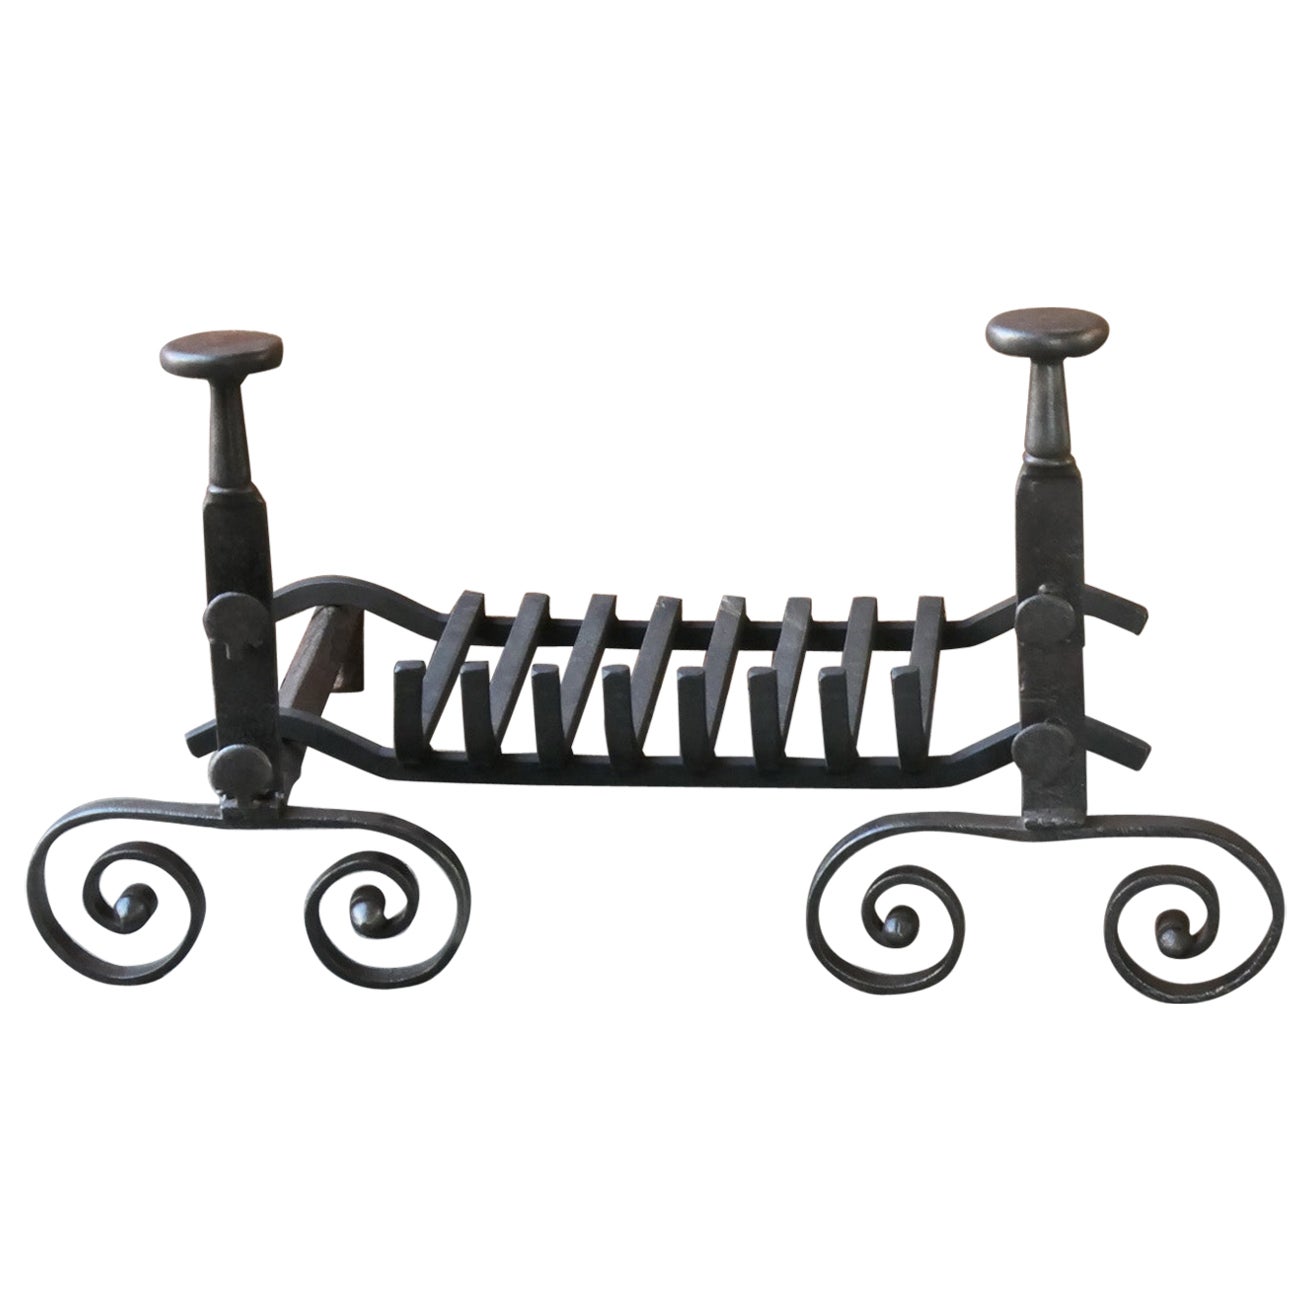 French Louis XV Period Fireplace Grate or Fire Basket, 18th Century For Sale